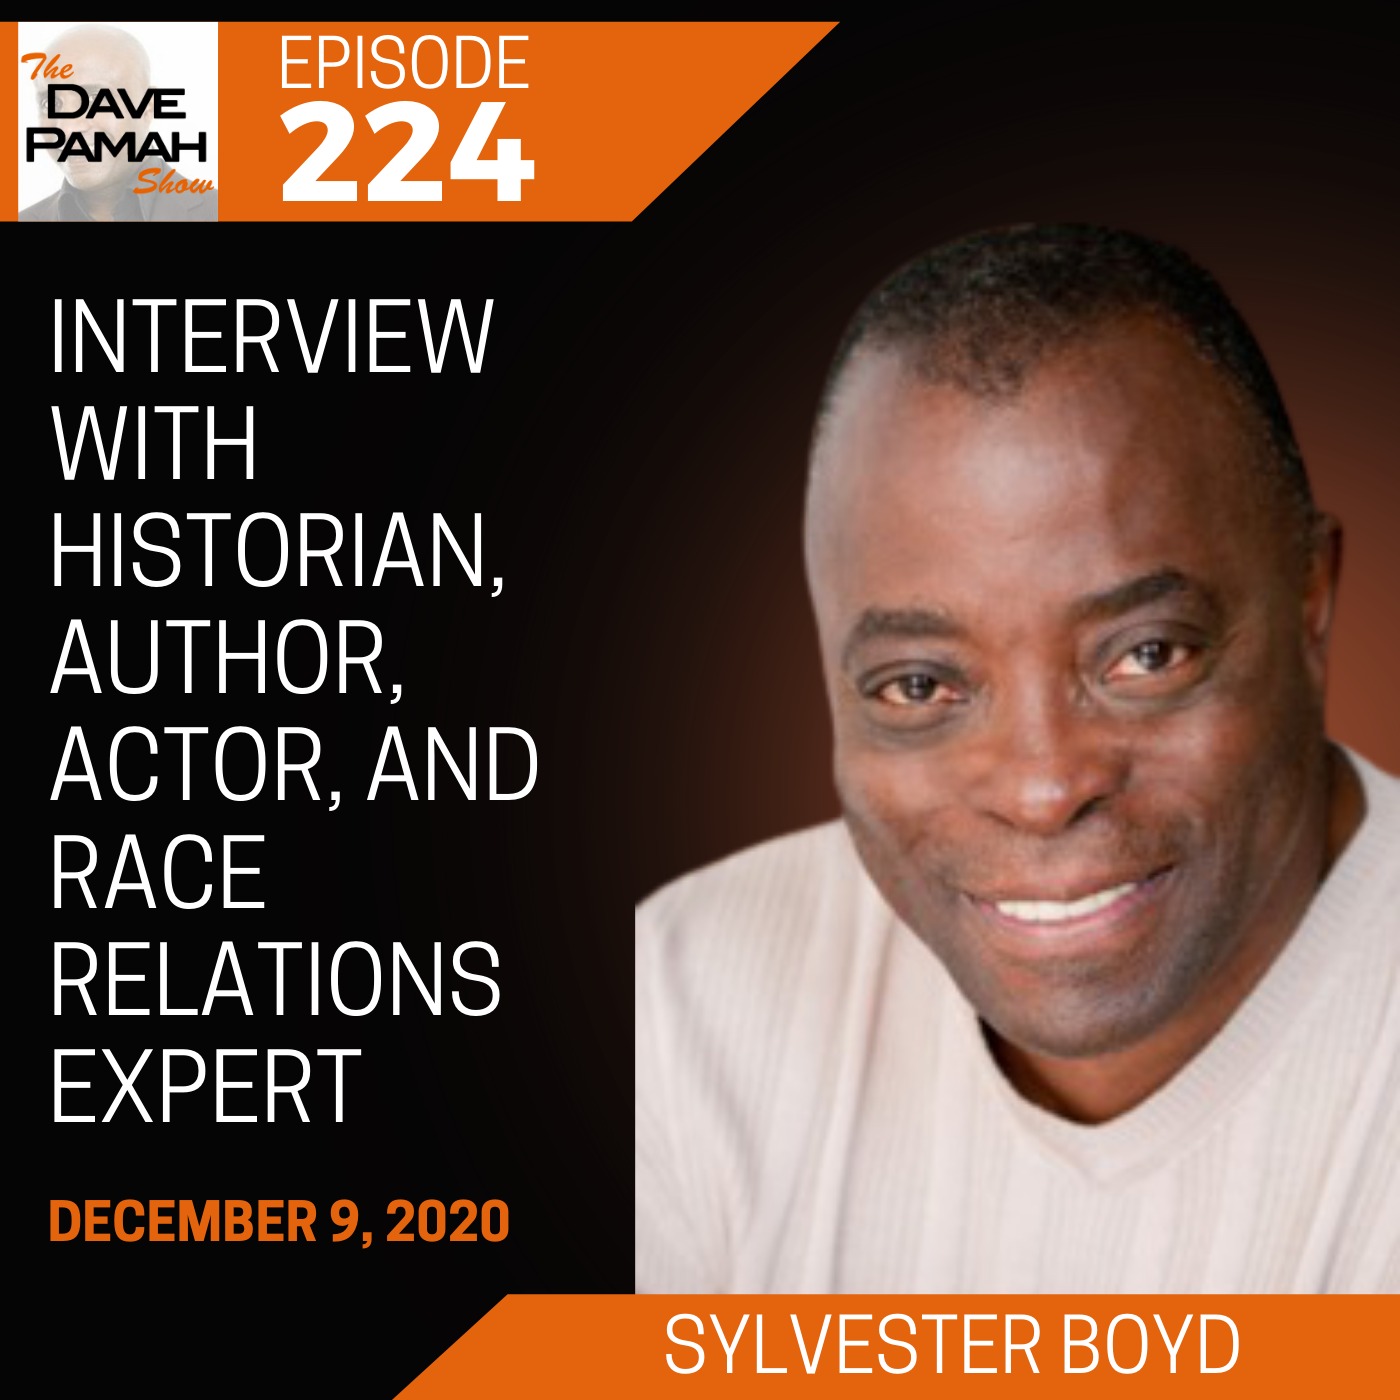 Interview with Historian, Author, Actor, and Race Relations Expert Sylvester Boyd Image